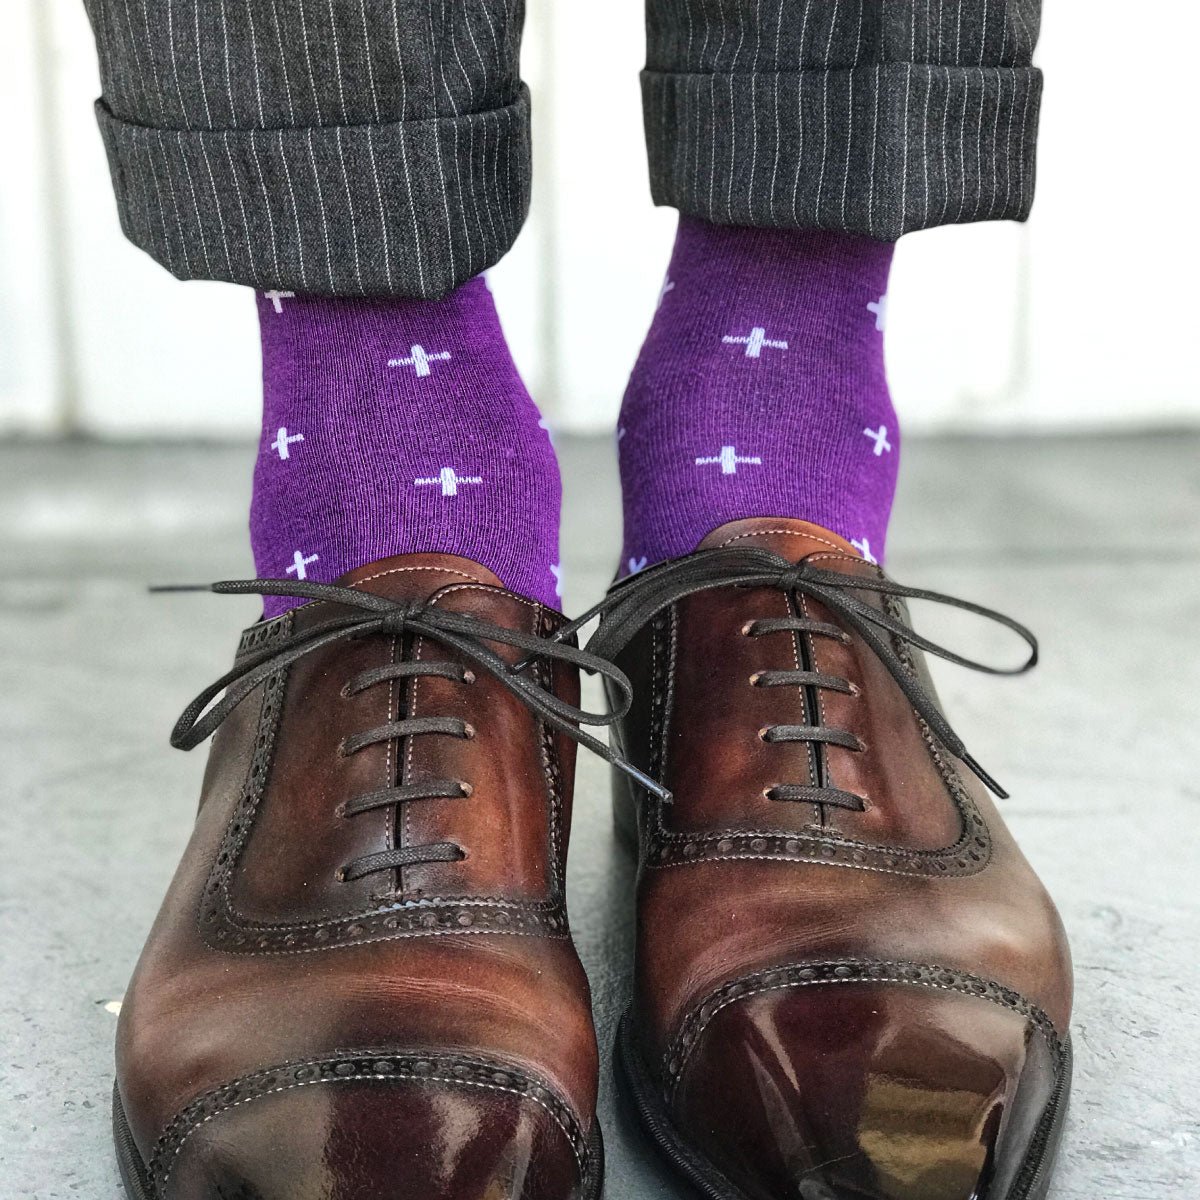 Guy wearing purple socks with grey slacks and brown shoes